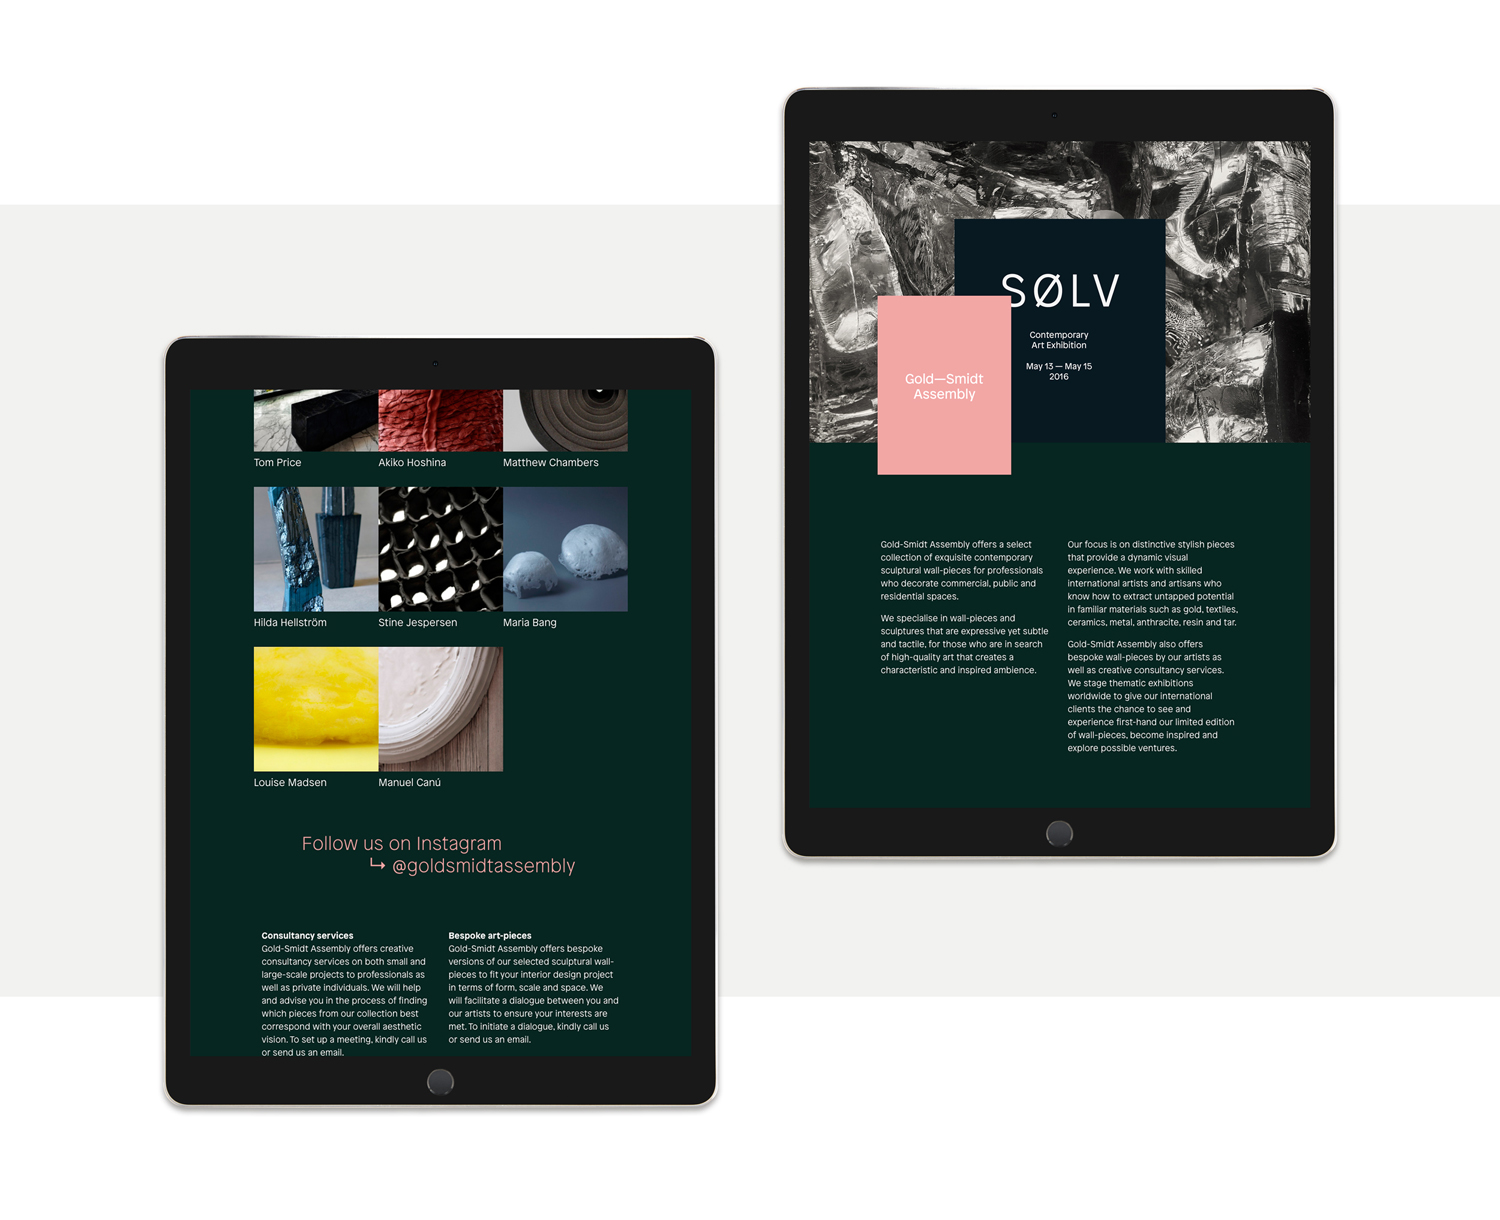 Brand identity and responsive website by Copenhagen design studio Republic for pop-up art gallery Gold—Smidt Assembly